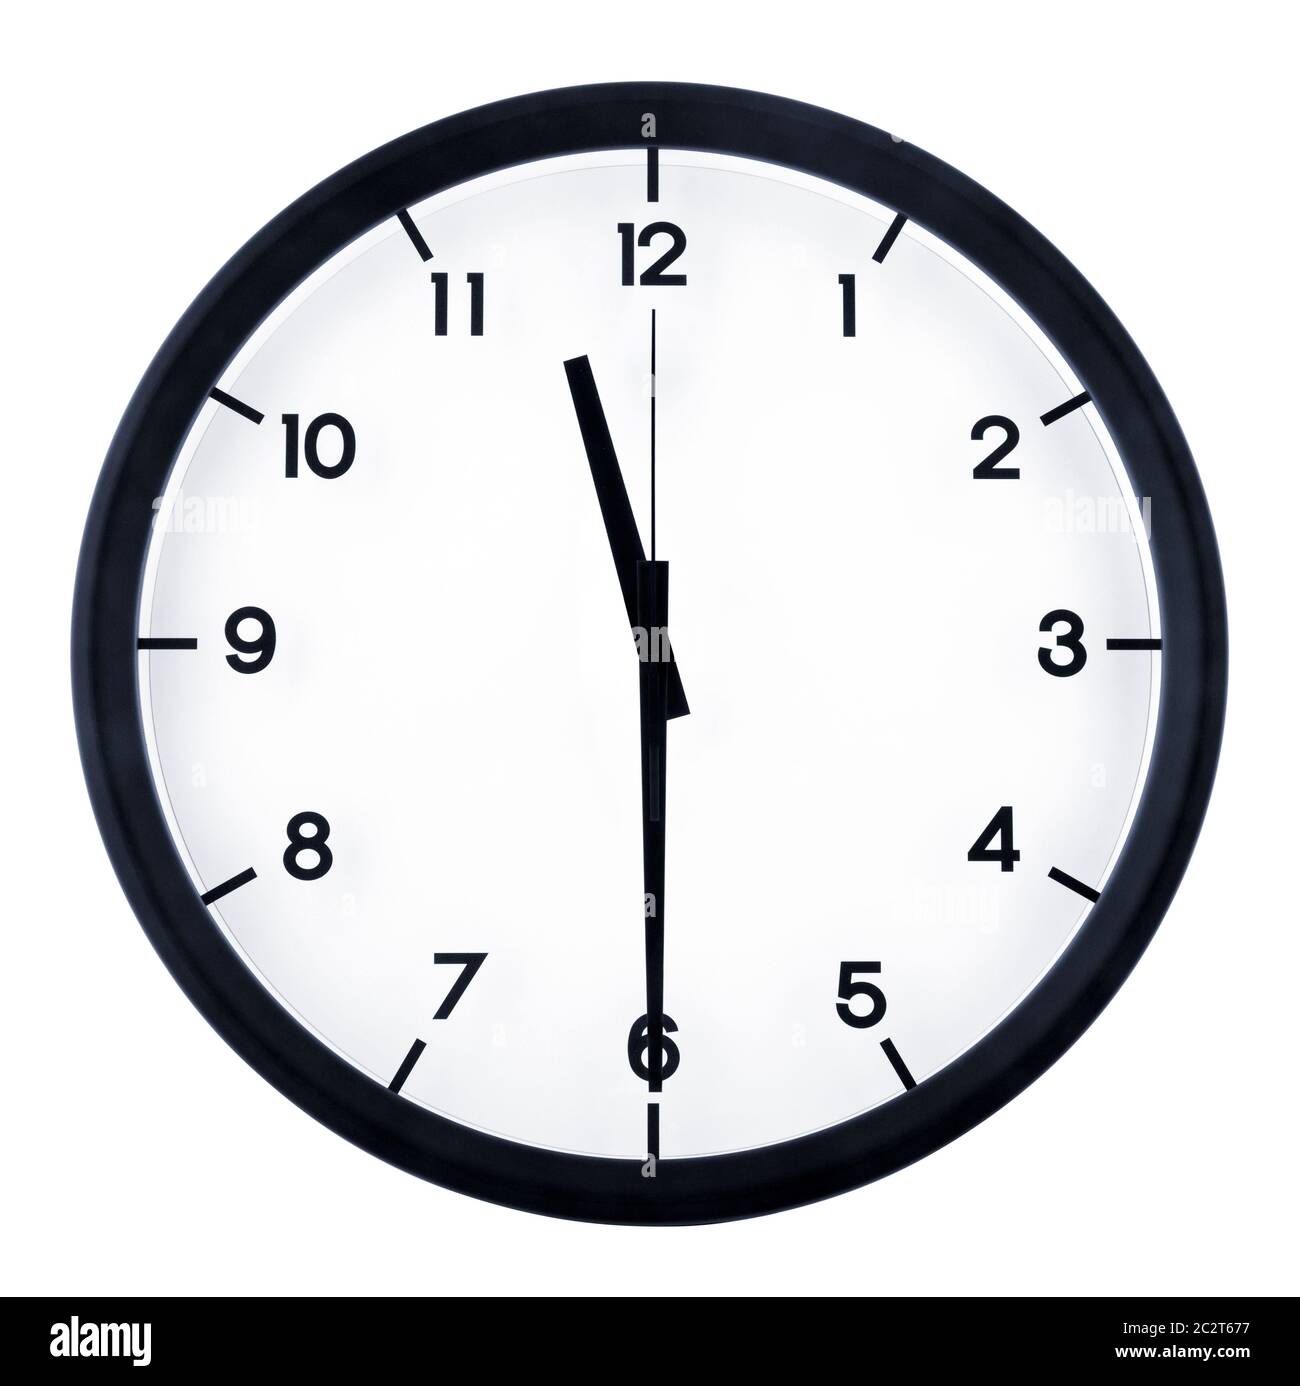 Classic analog clock pointing at 8 o'clock, isolated on white background Stock Photo